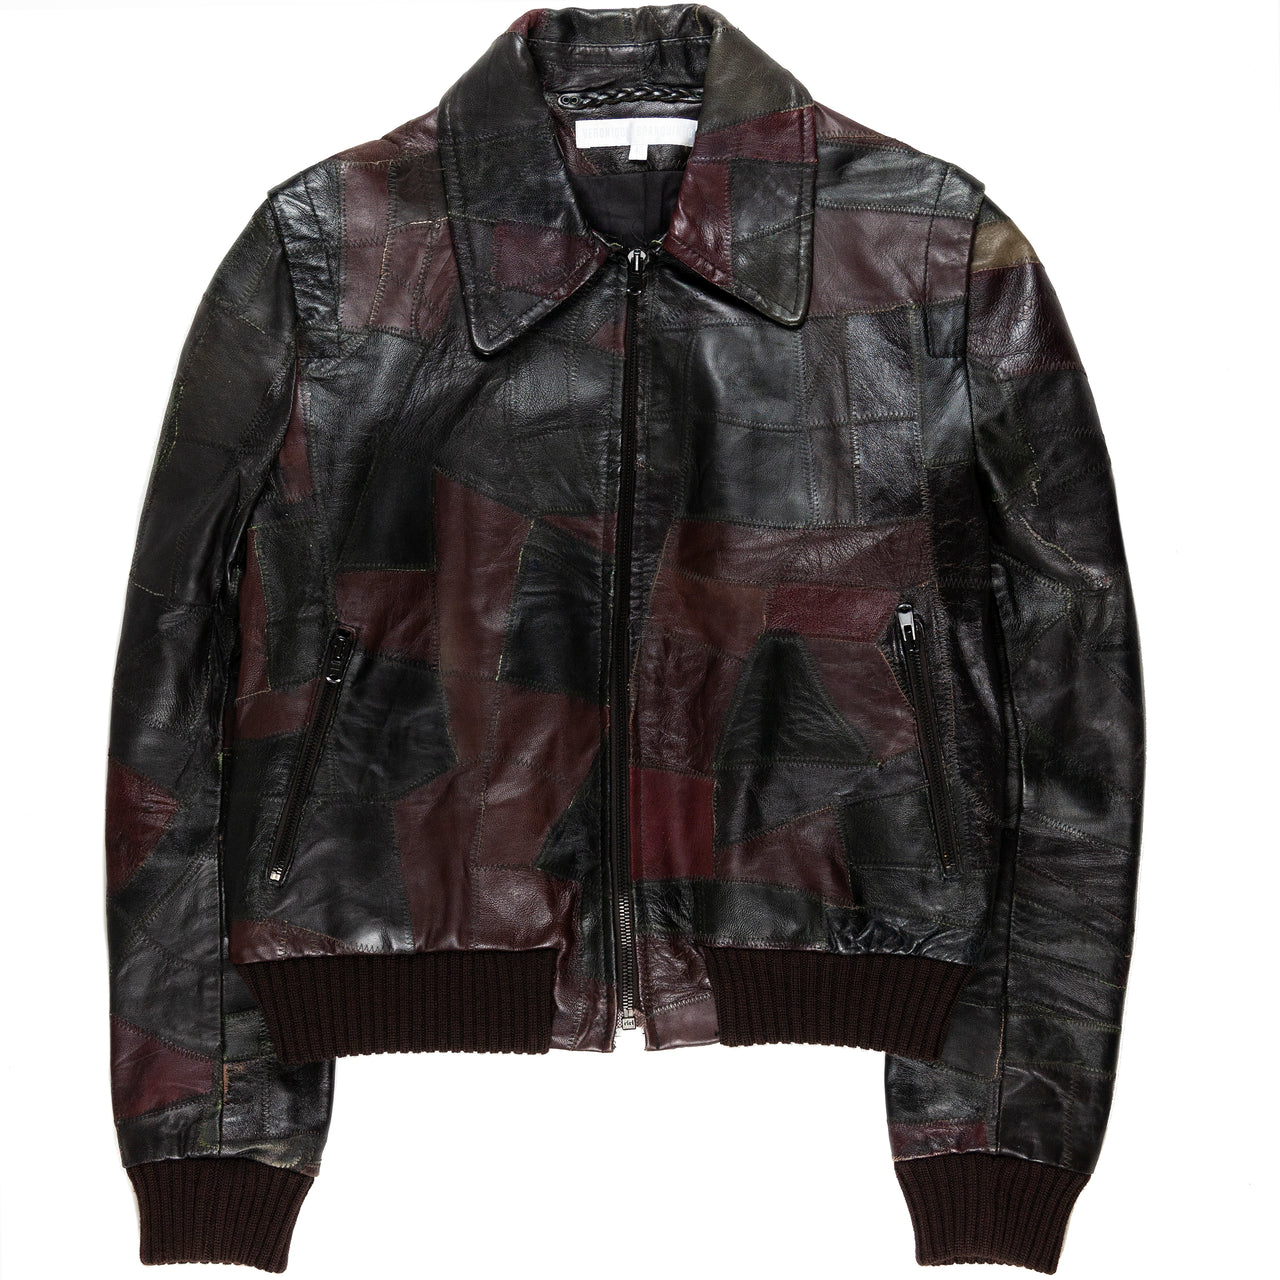 VERONIQUE BRANQUINHO RECONSTRUCTED LEATHER JACKET - AW01